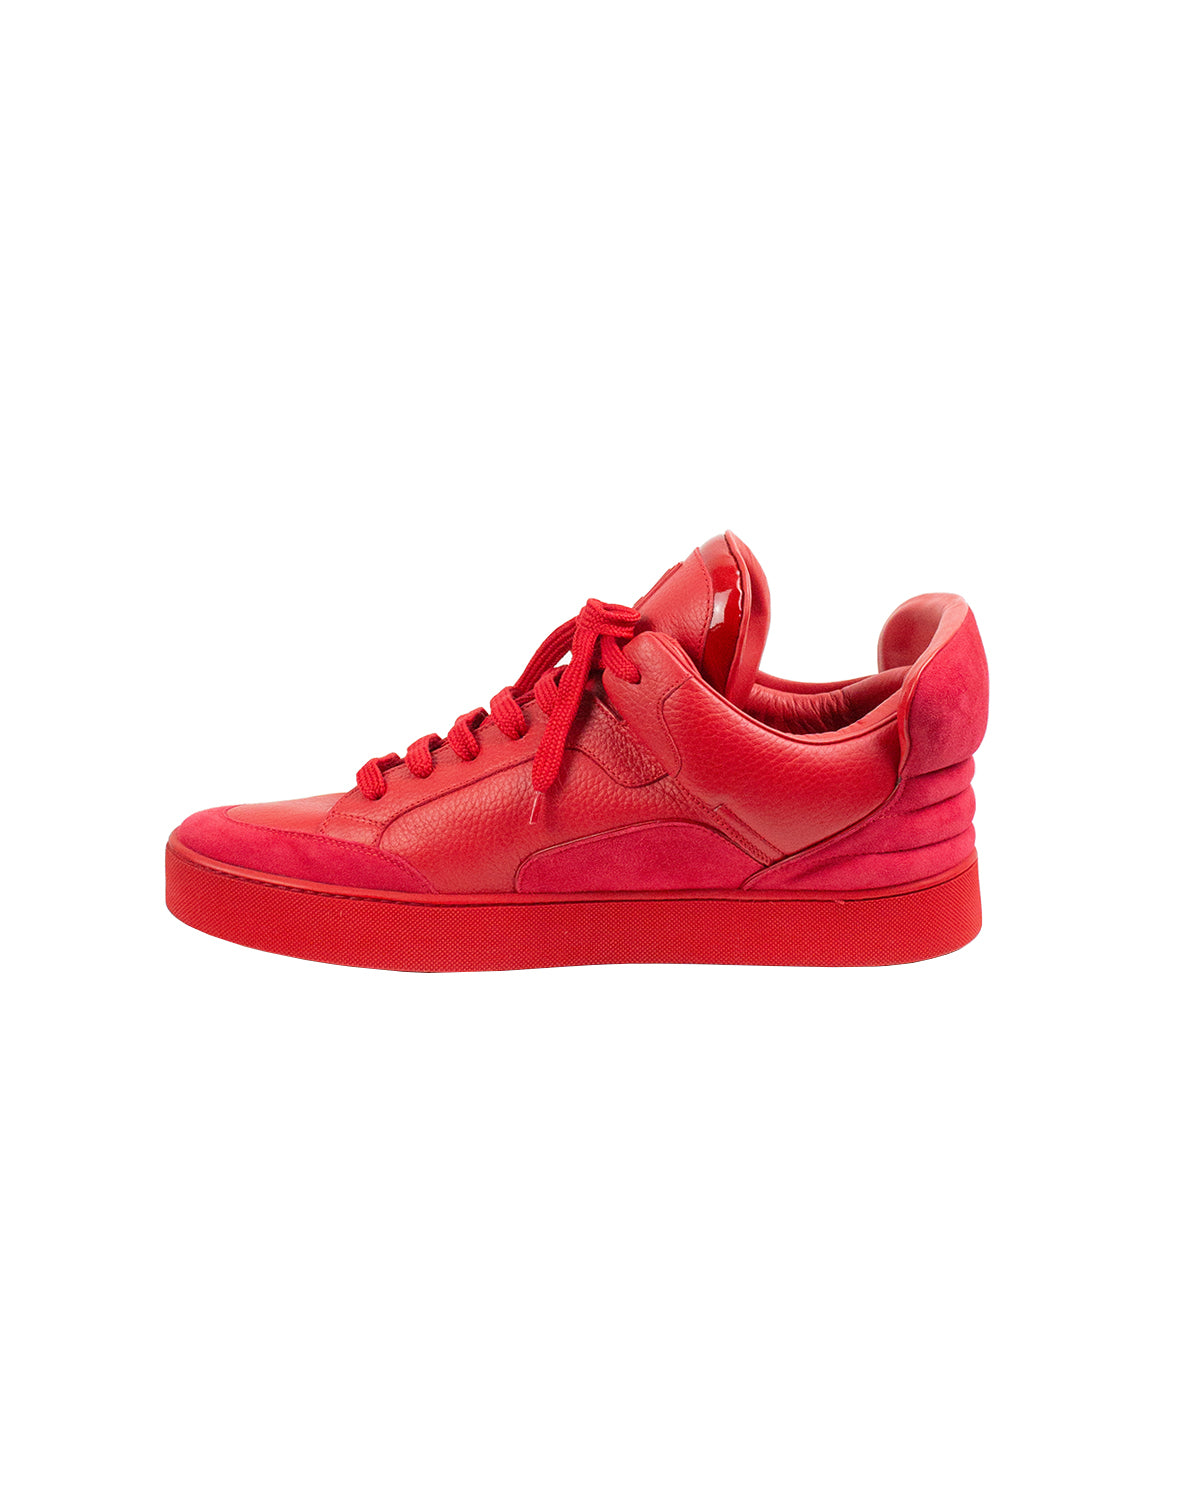 Kanye West for Louis Vuitton Sneakers Preview